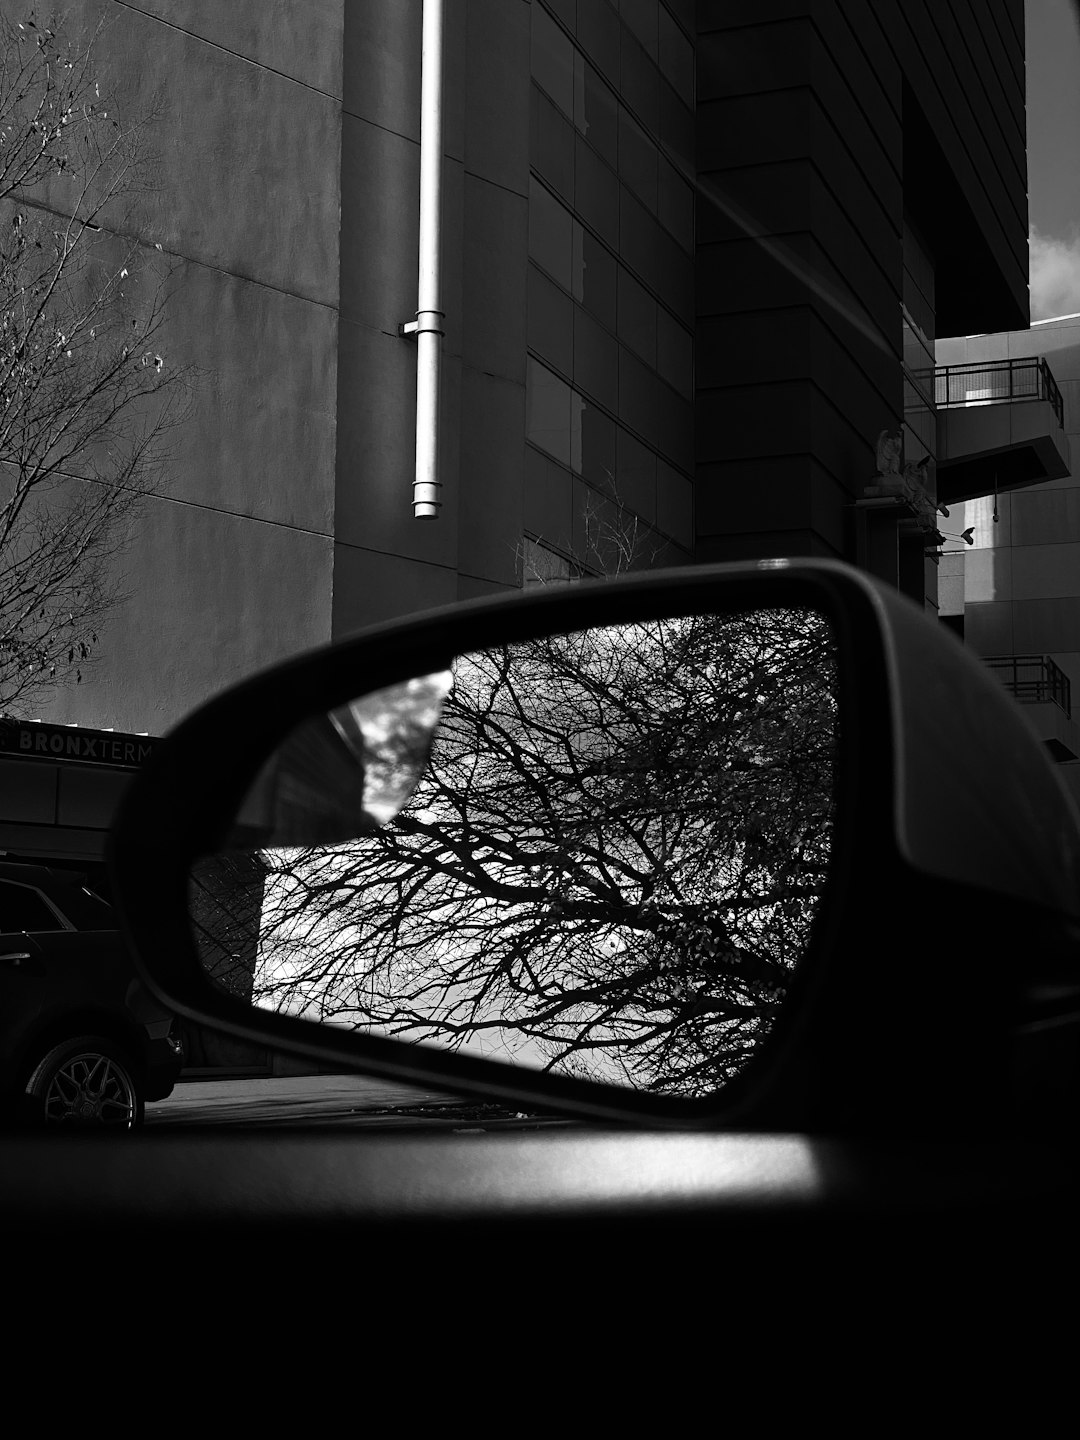 car side mirror reflecting bare trees